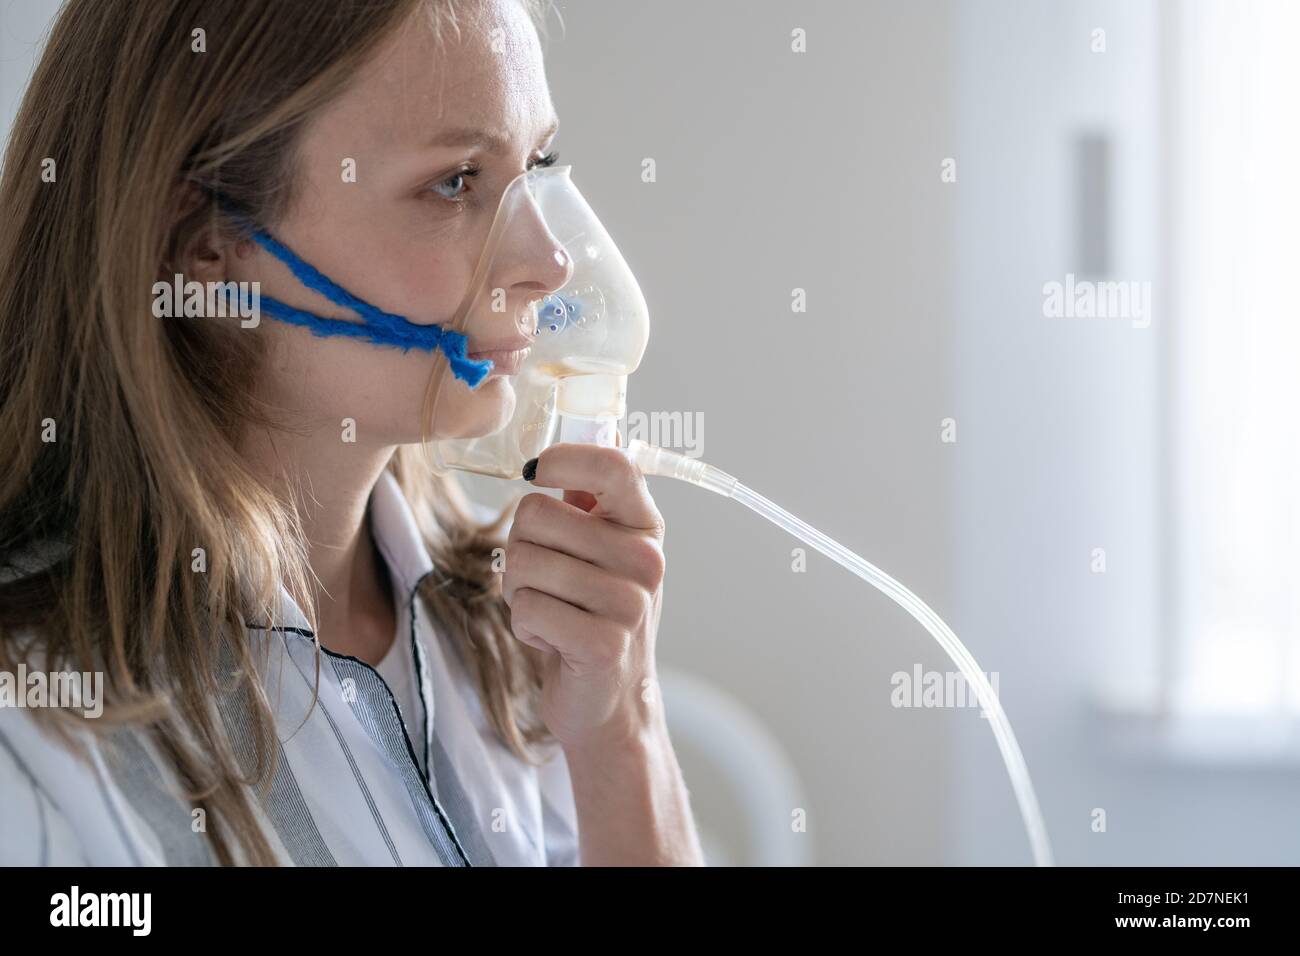 Sick young female patient holding oxygen mask by her mouth and nose Stock Photo